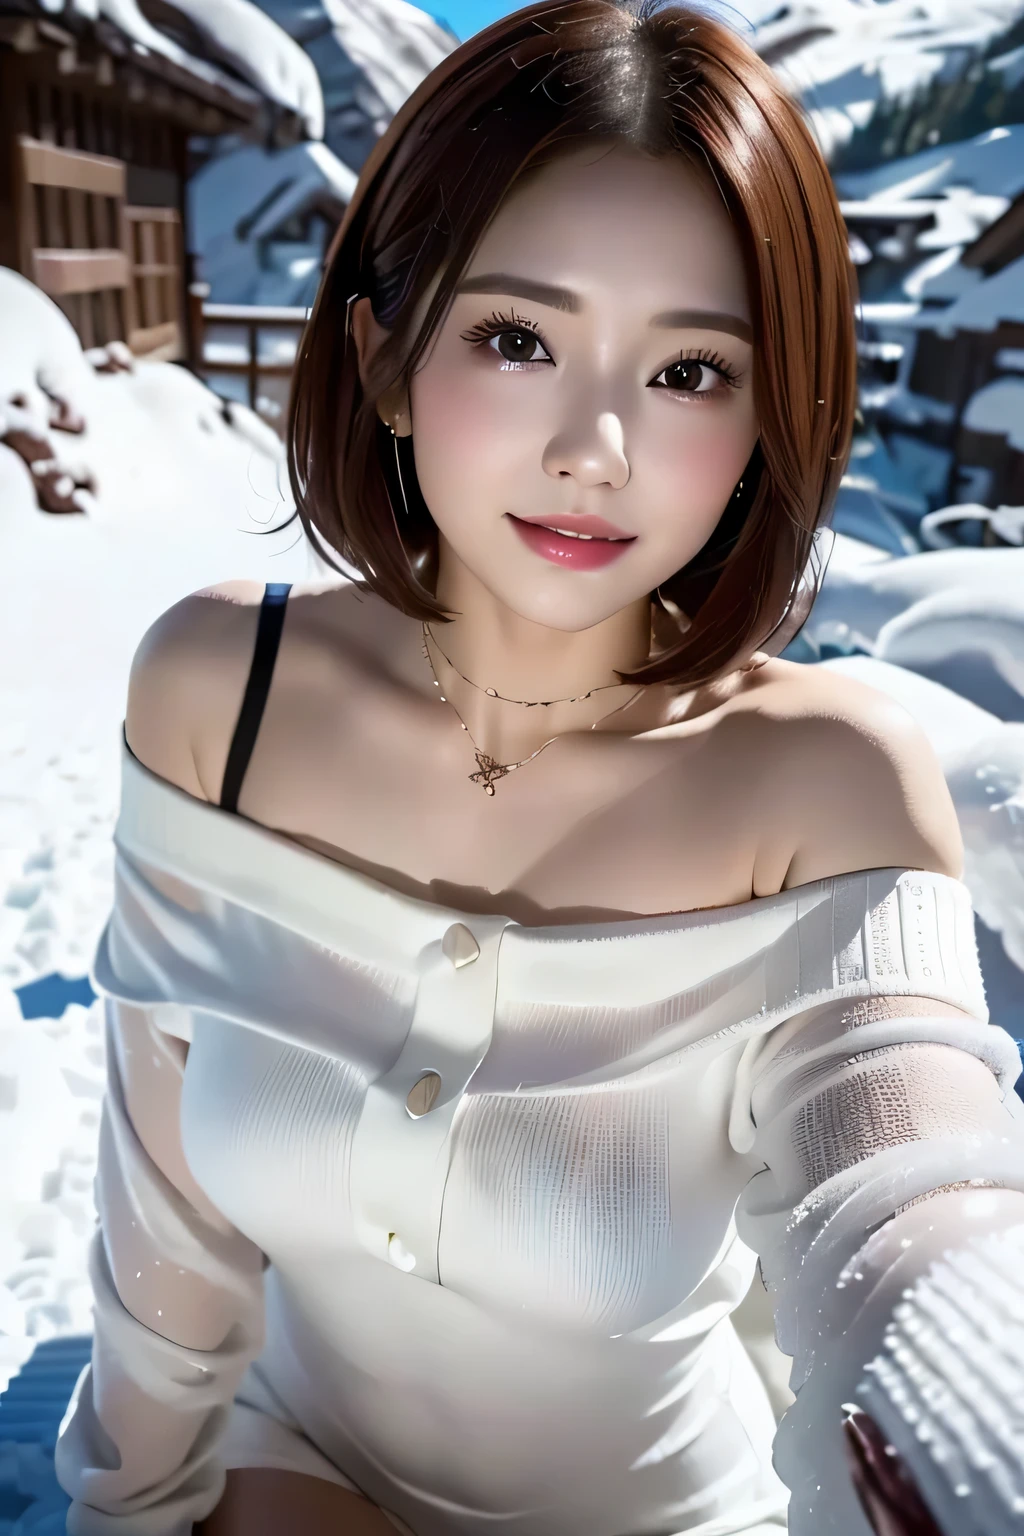 (The contrast of light and shadow makes the subject appear three-dimensional),(((With the sunset in the background))),(((Winter snowy mountain climbing scenery:1.3))),cute and beautiful adult woman,Cute round face,Cute Smile,blush your cheeks,Red lips,(((Off-white off-shoulder knit tight dress:1.3))),Black Stockings,Knee-high boots,flower、hairpin、necklace、Looking up from under the earrings,Written boundary depth、pointed red mouth、(Reddish brown wet shiny short hair:1.3),Red Mouth,clavicle,Beautiful fingers,hourglass shaped body,Full body portrait, Wet Face、digital illustration, (Photorealistic:1.3),(RAW Photos.), (Tabletop,highest quality,Ultra-high resolution output images,) (8K quality,),(Picture Mode Ultra HD),(Picture Mode Ultra HD)、